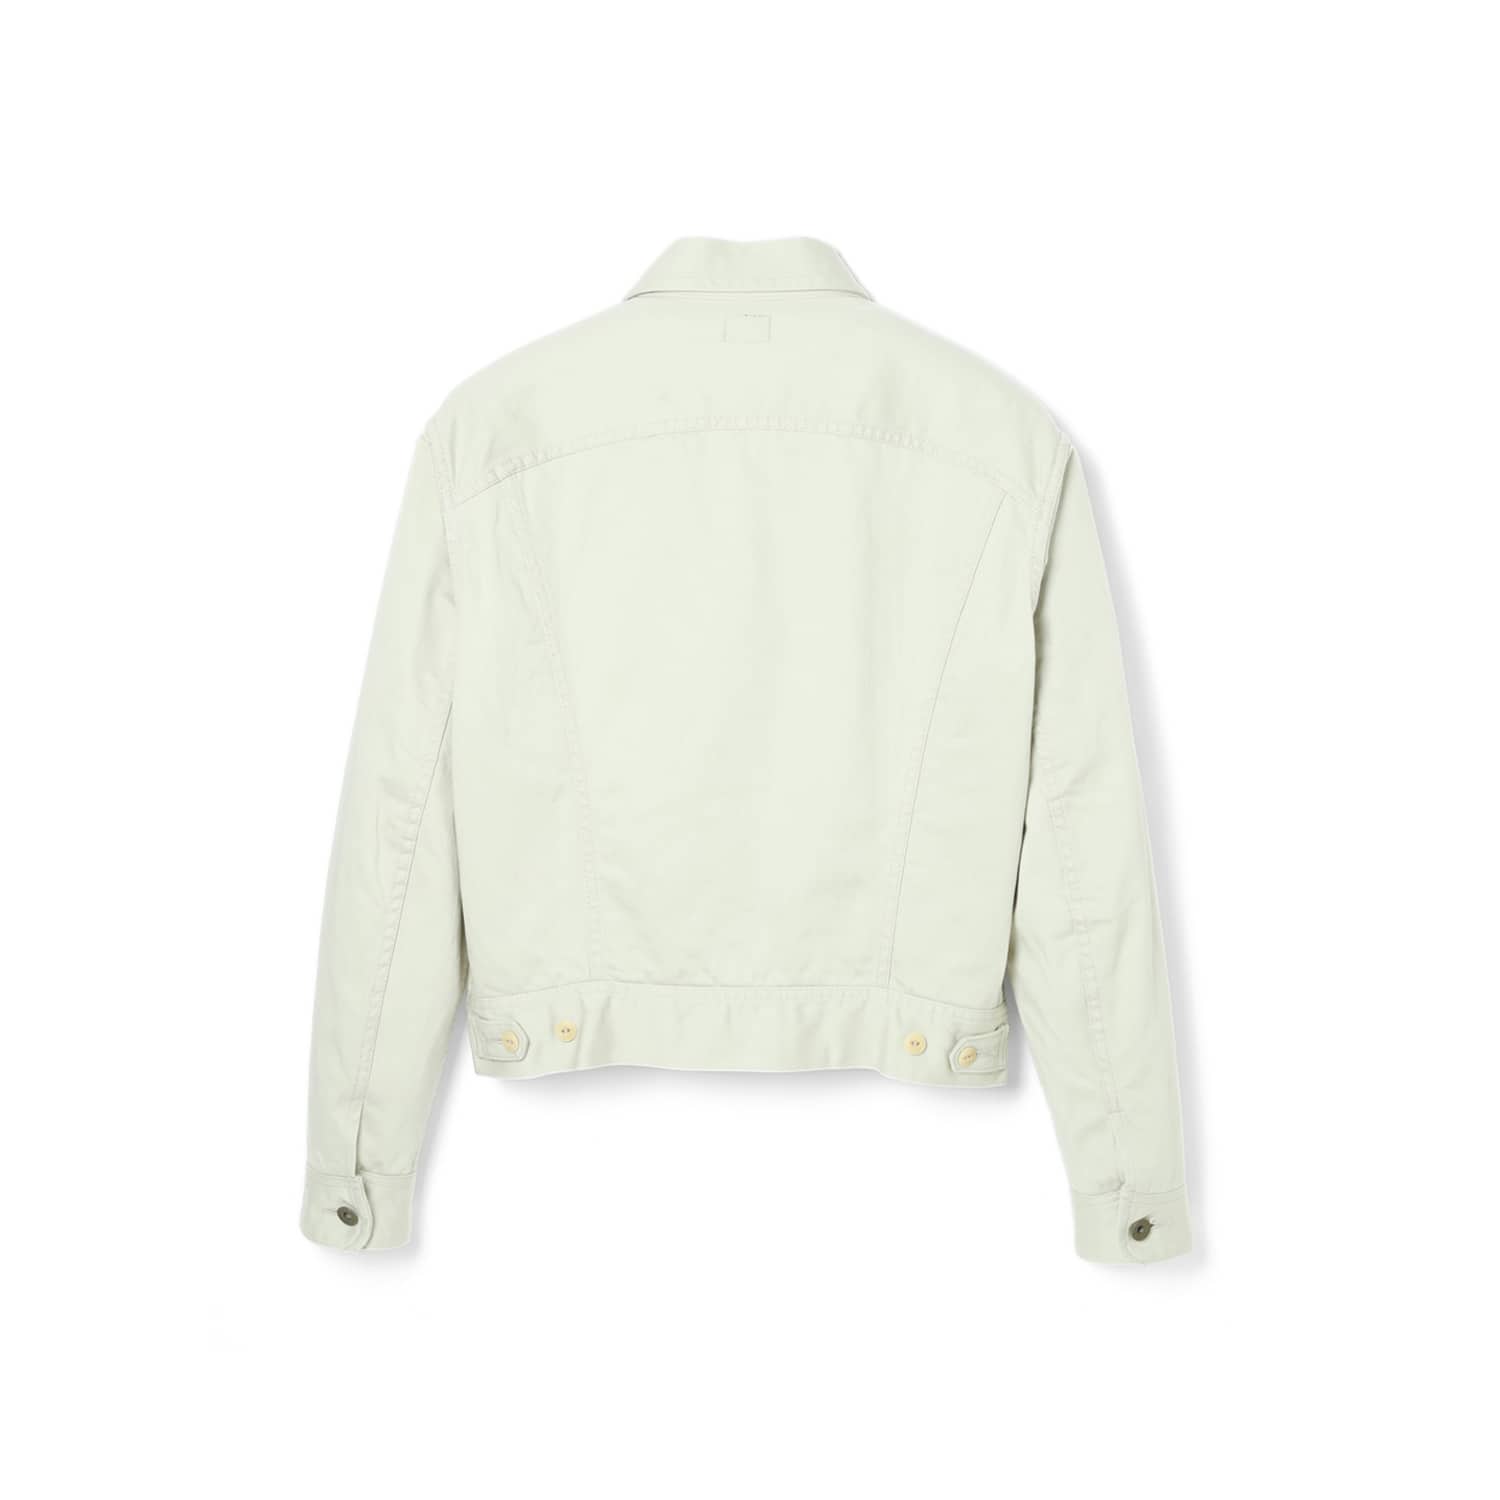 Stevenson Overall Co. Rough Rider Cowboy Jacket Ivory